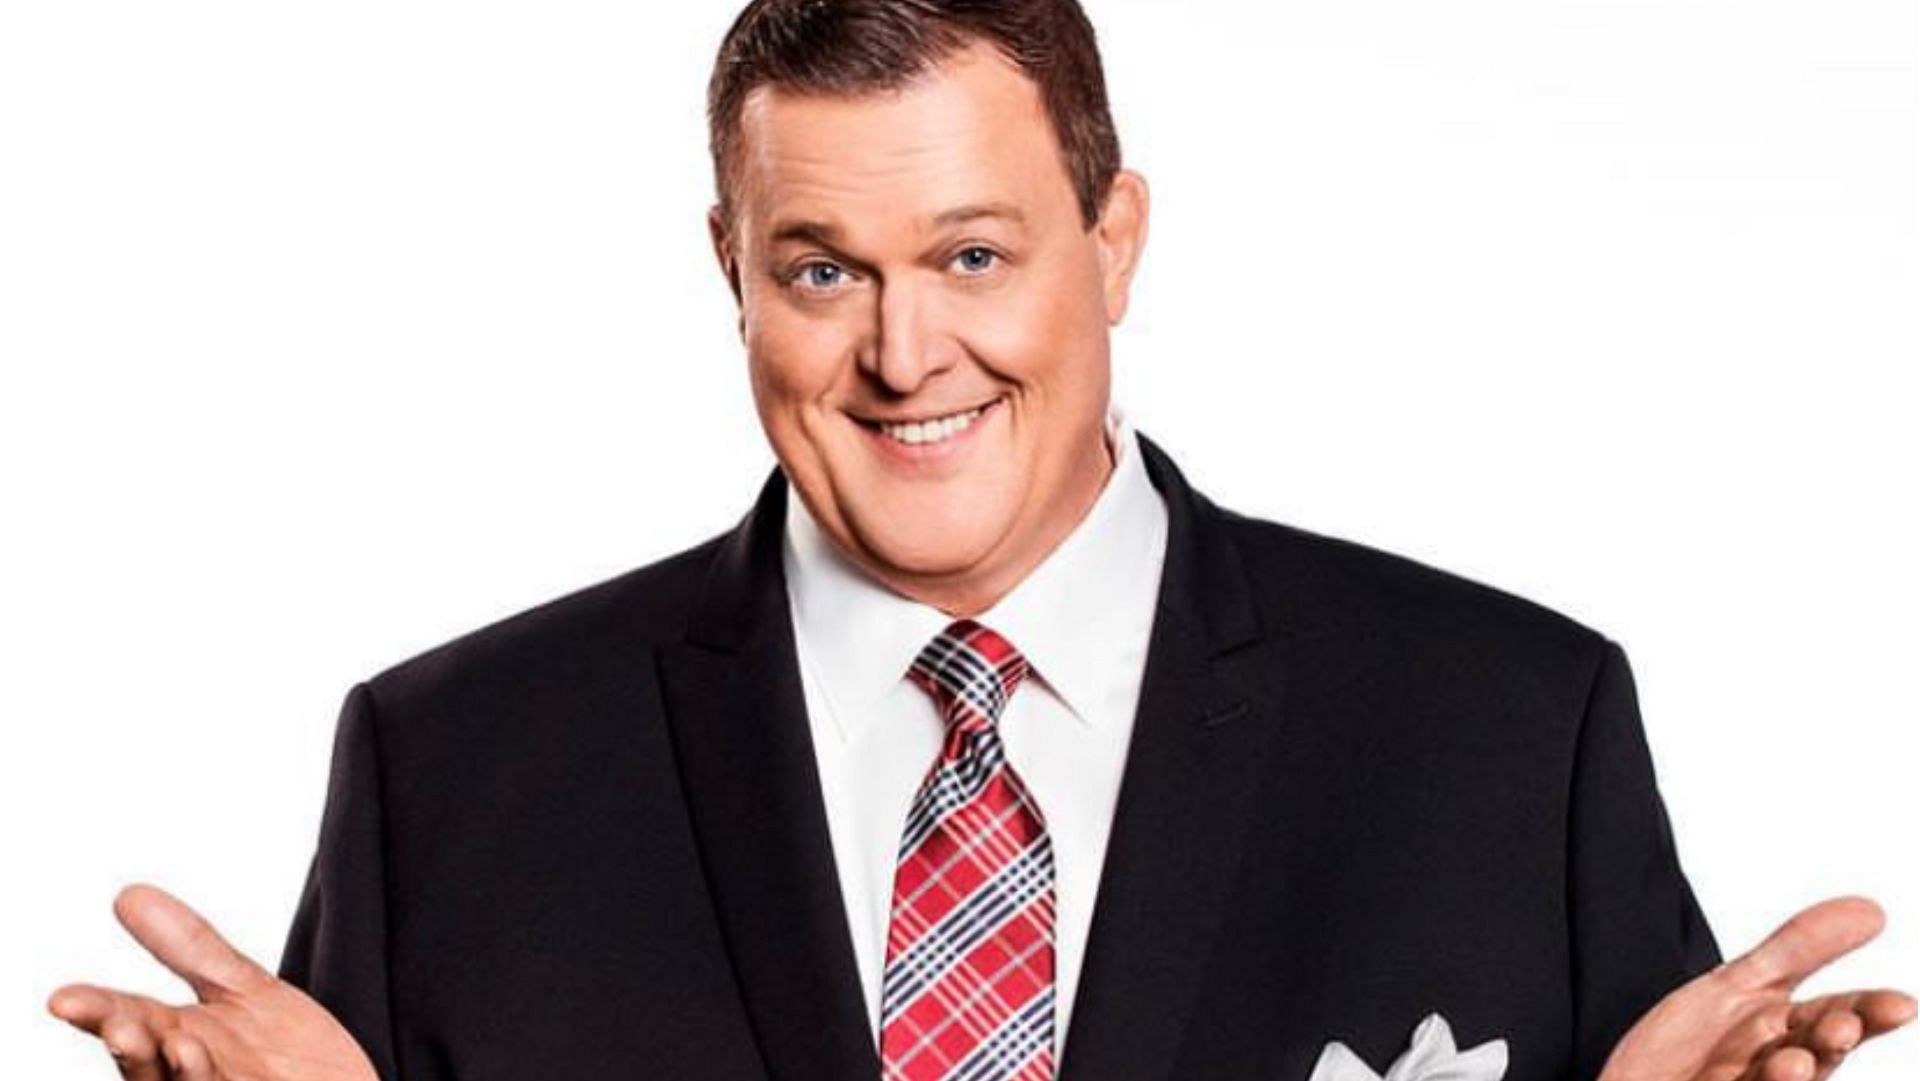 Billy Gardell&rsquo;s weight loss included simple exercises and changes to his diet. (Photo via Instagram/thetrewestbury)